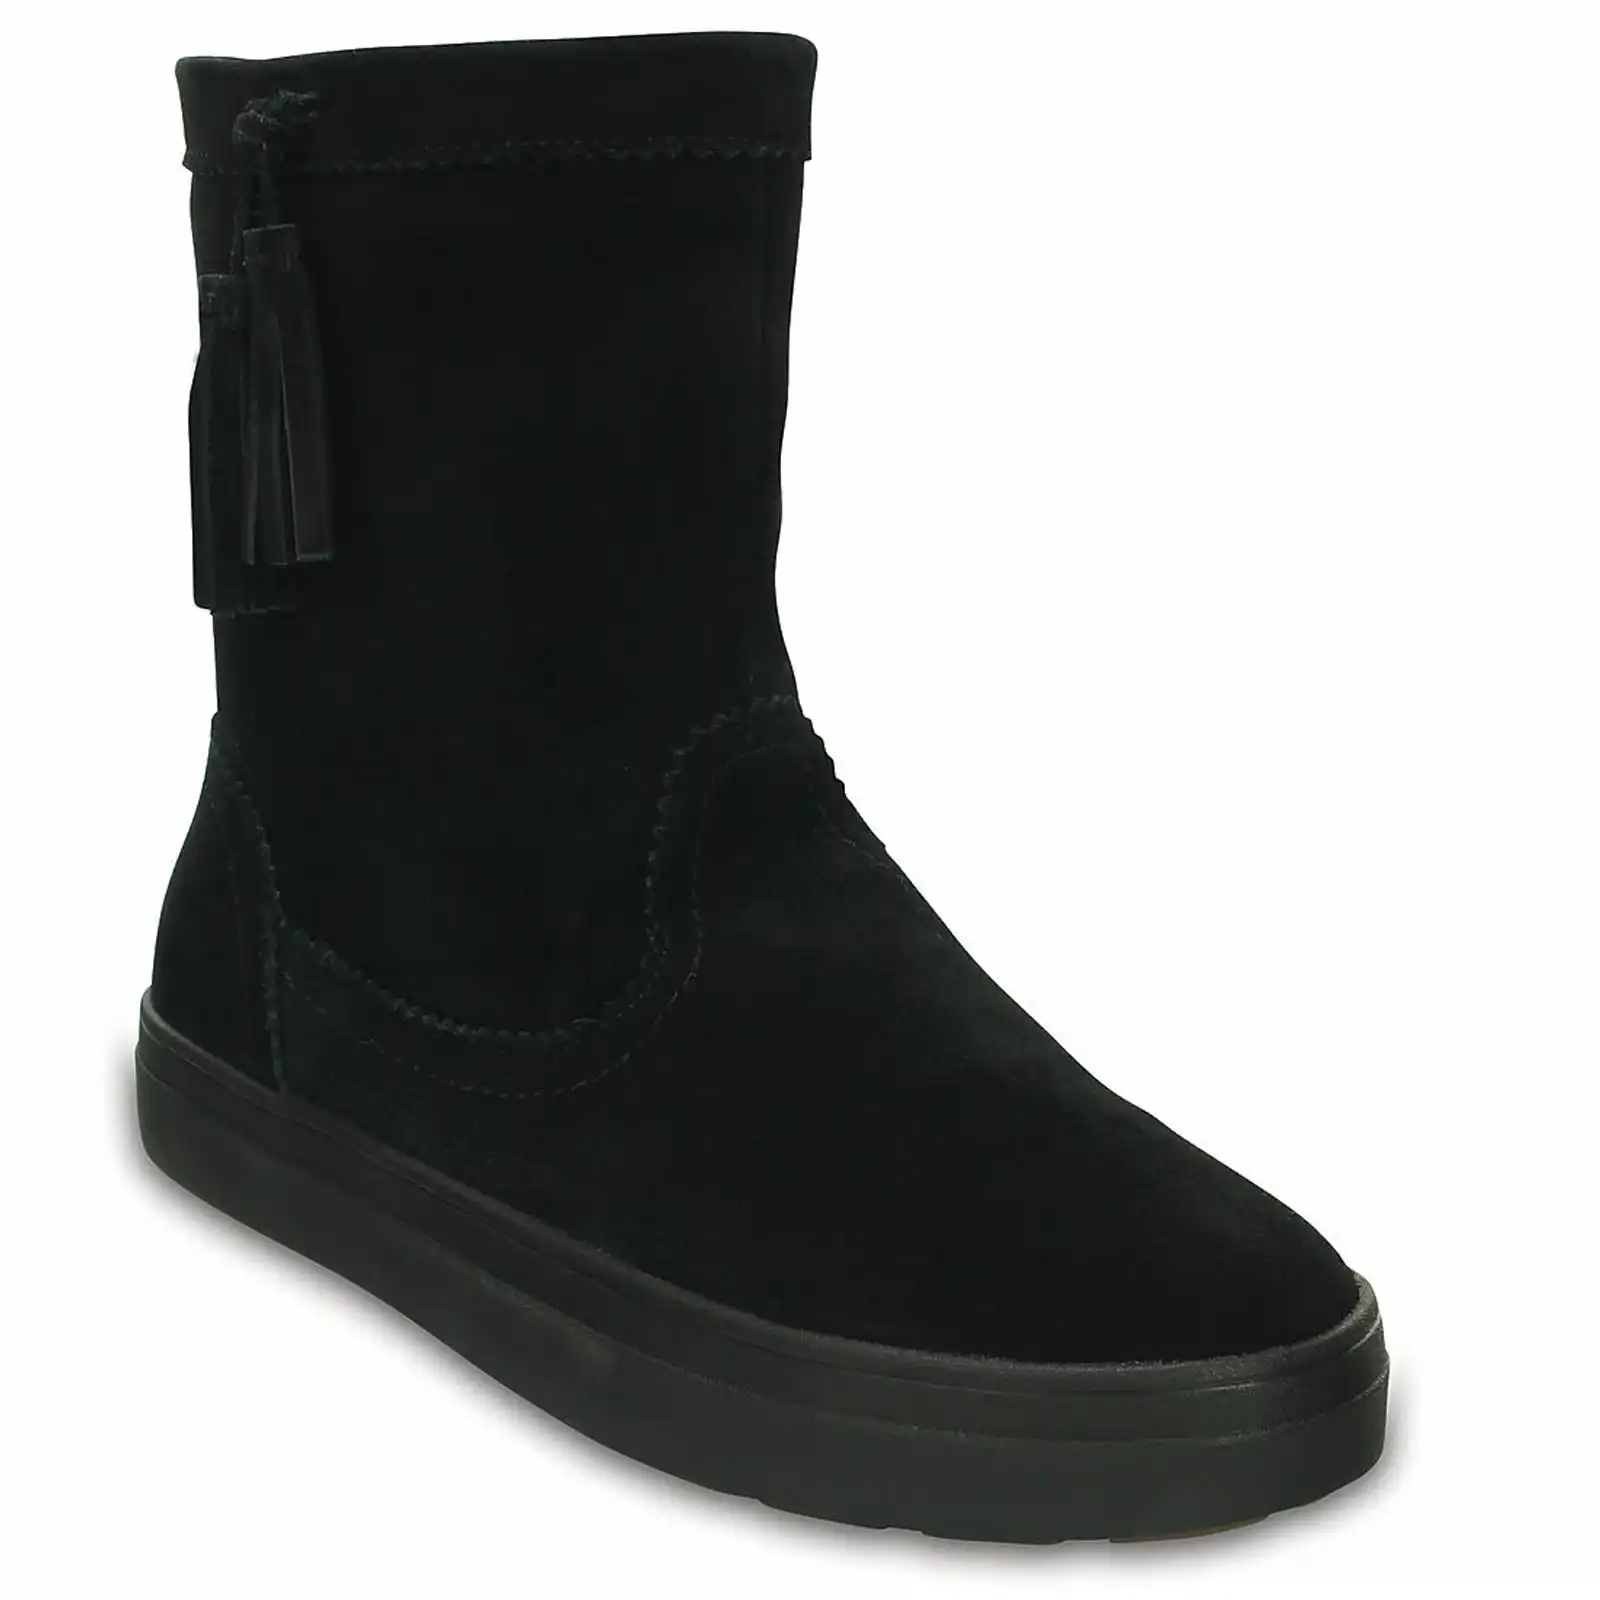 Crocs LodgePoint Women's Suede Leather Pull On Boots Shoes Ugg - Black